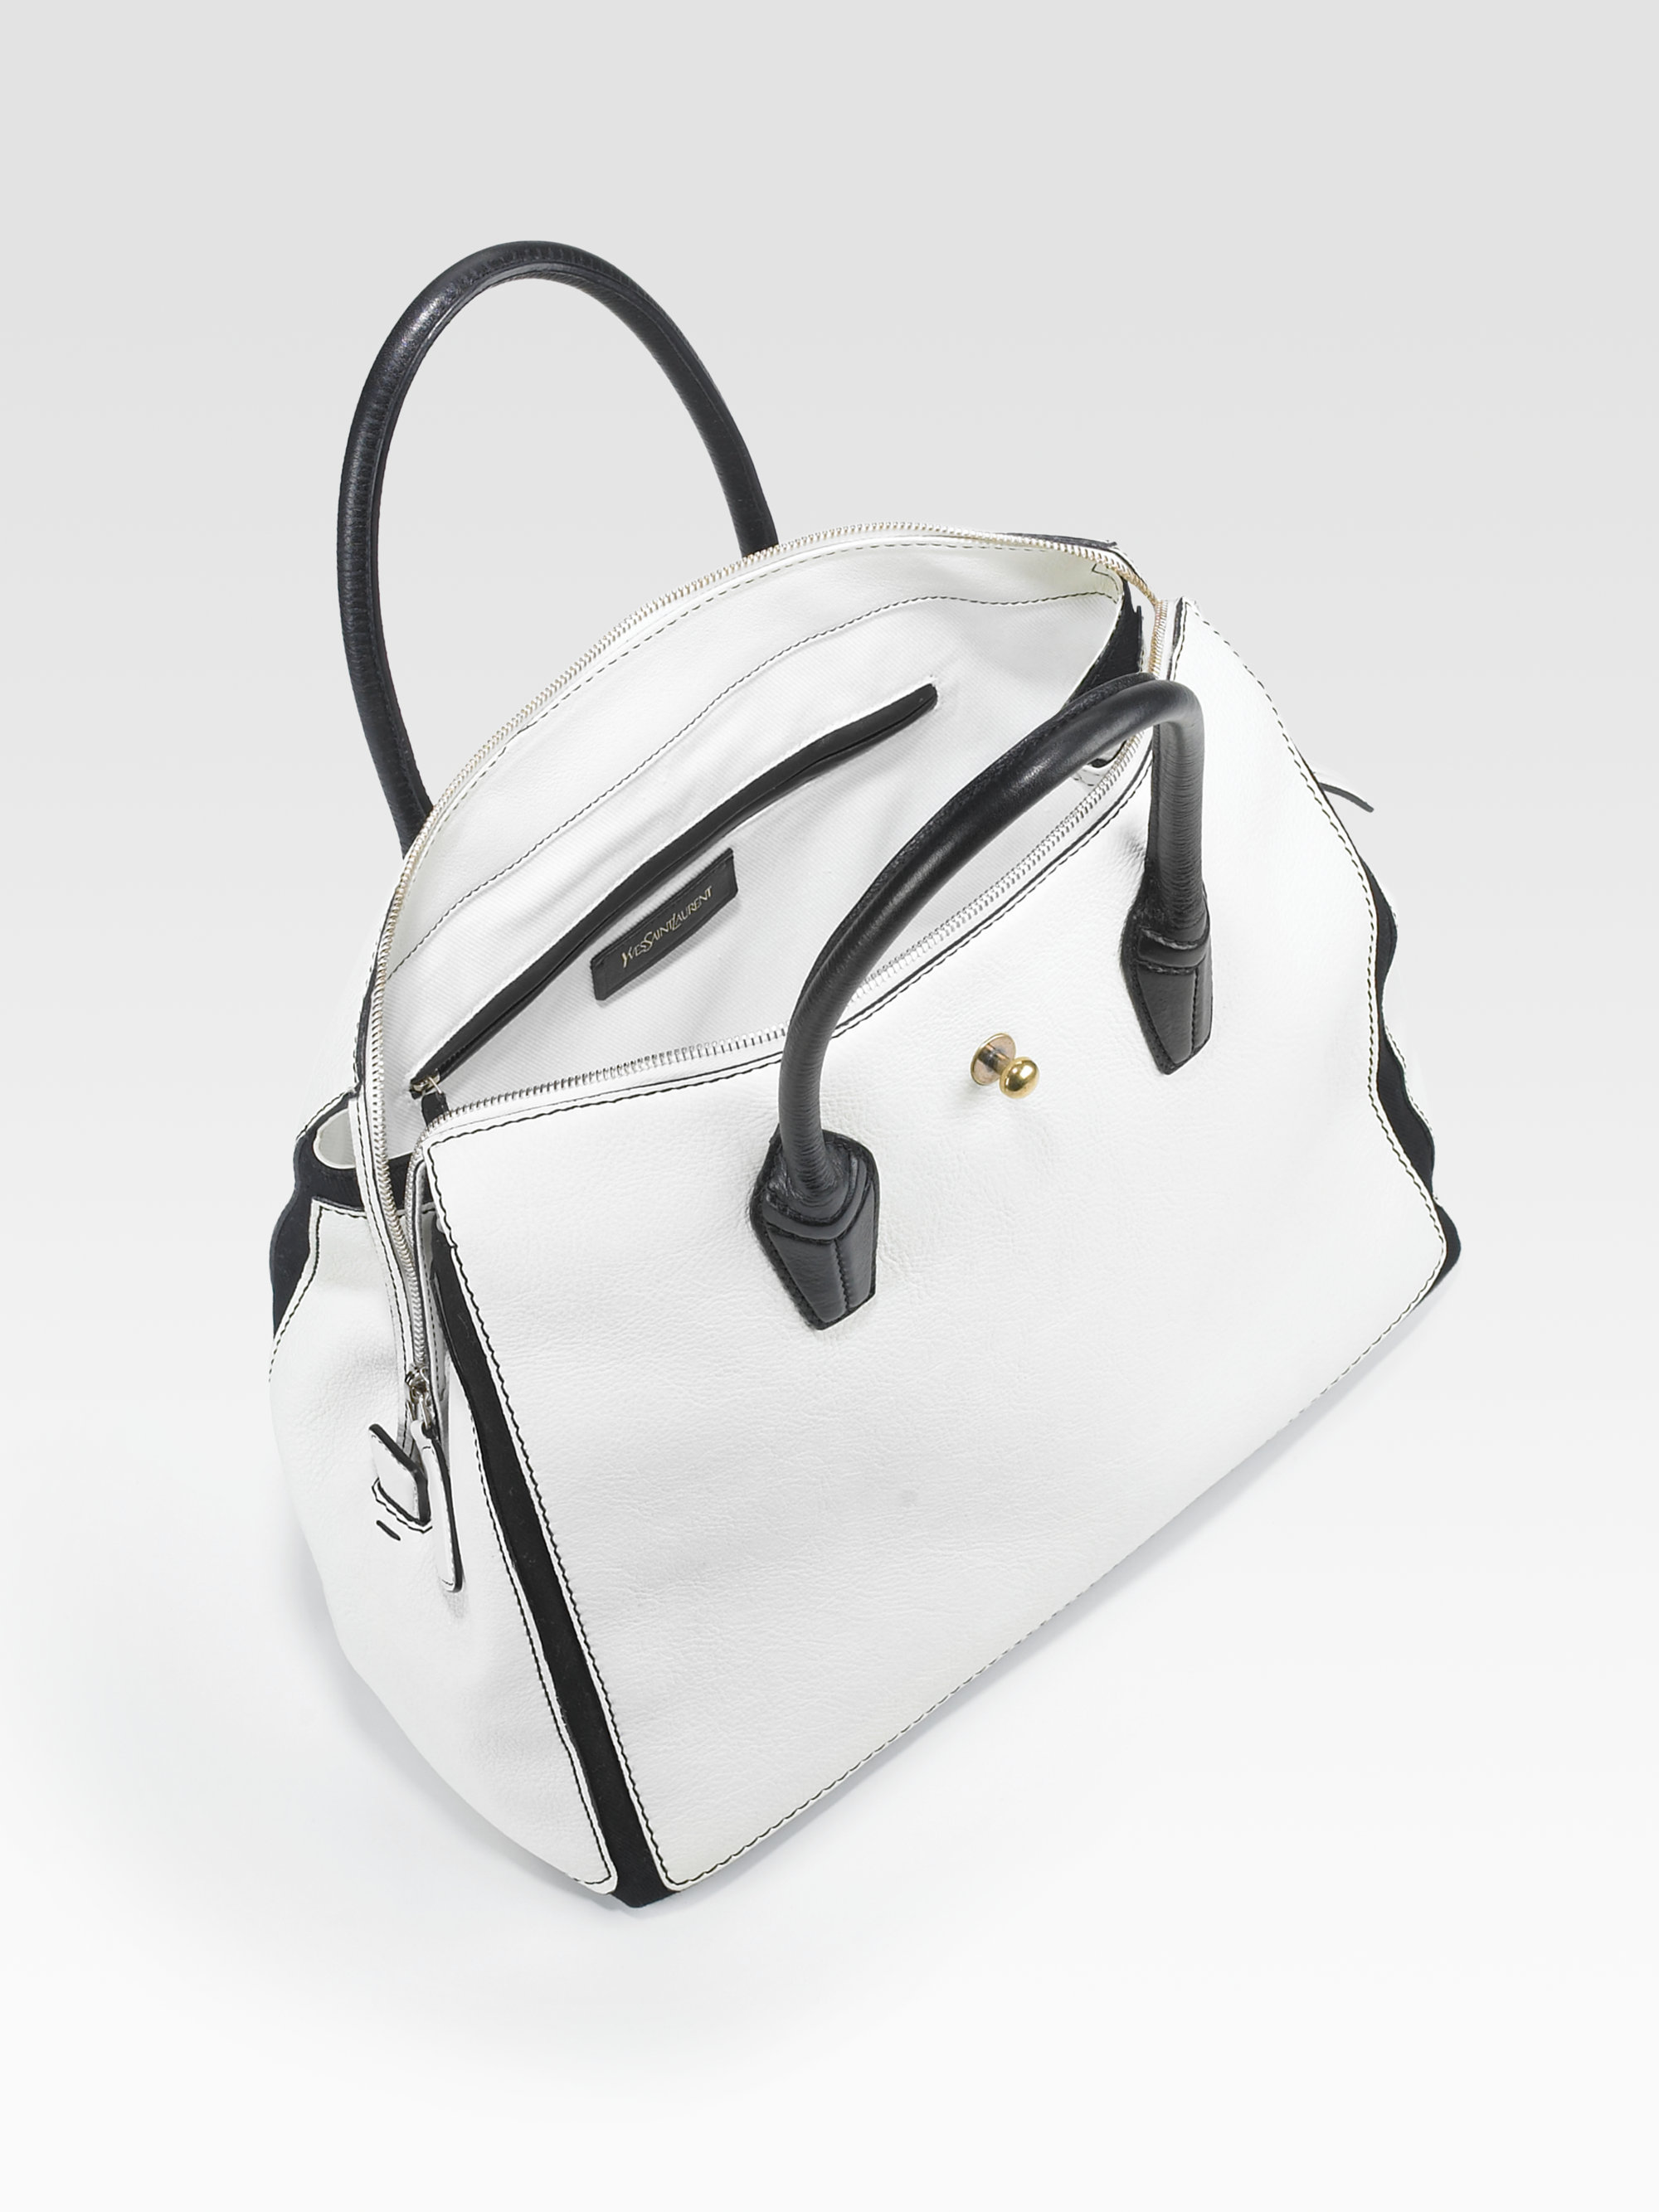 Saint laurent Ysl Muse Two Cabas Satchel in White (white-black) | Lyst  